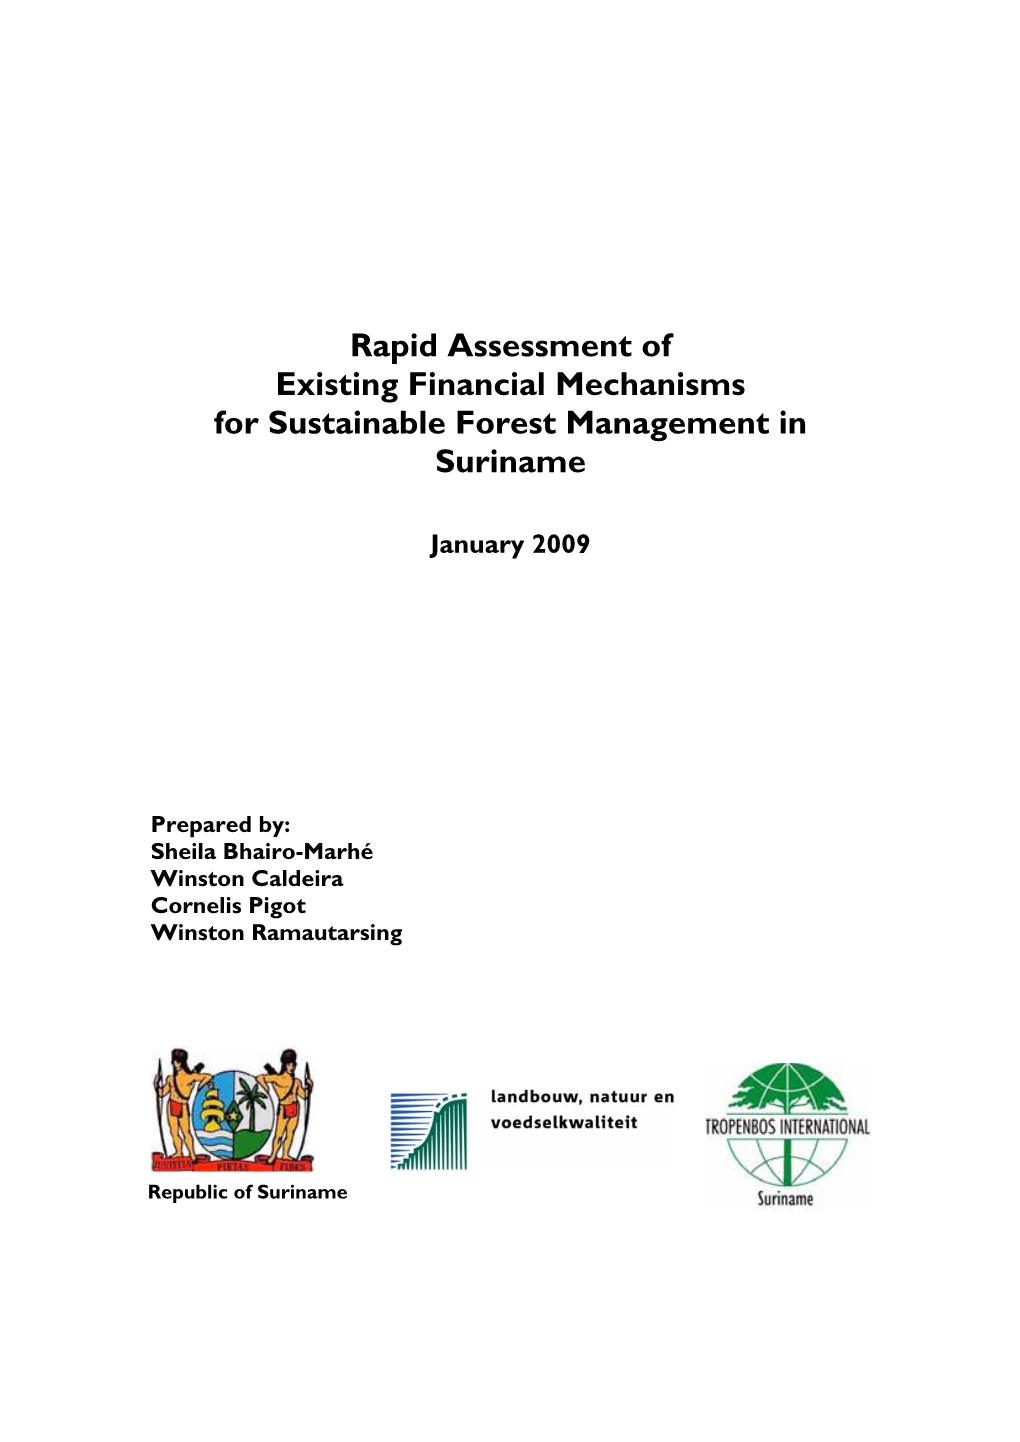 Rapid Assessment of Existing Financial Mechanisms for Sustainable Forest Management in Suriname